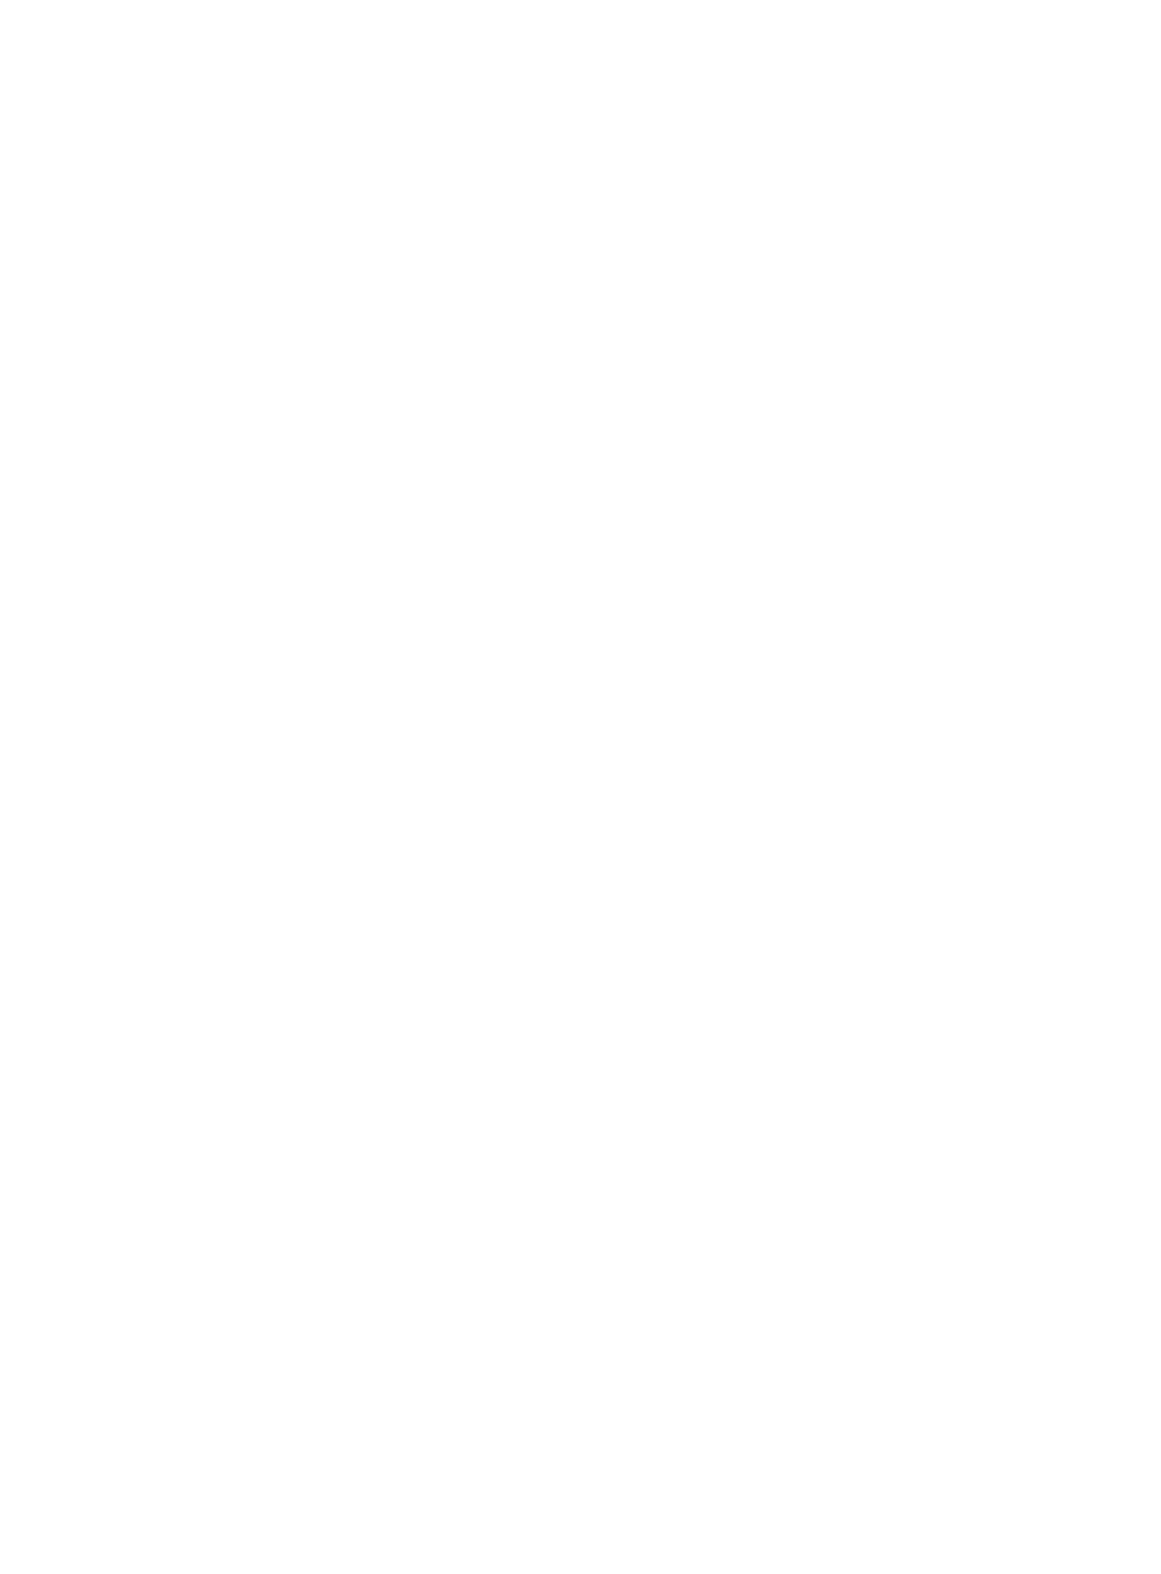 Naqi Water Company logo pour fonds sombres (PNG transparent)